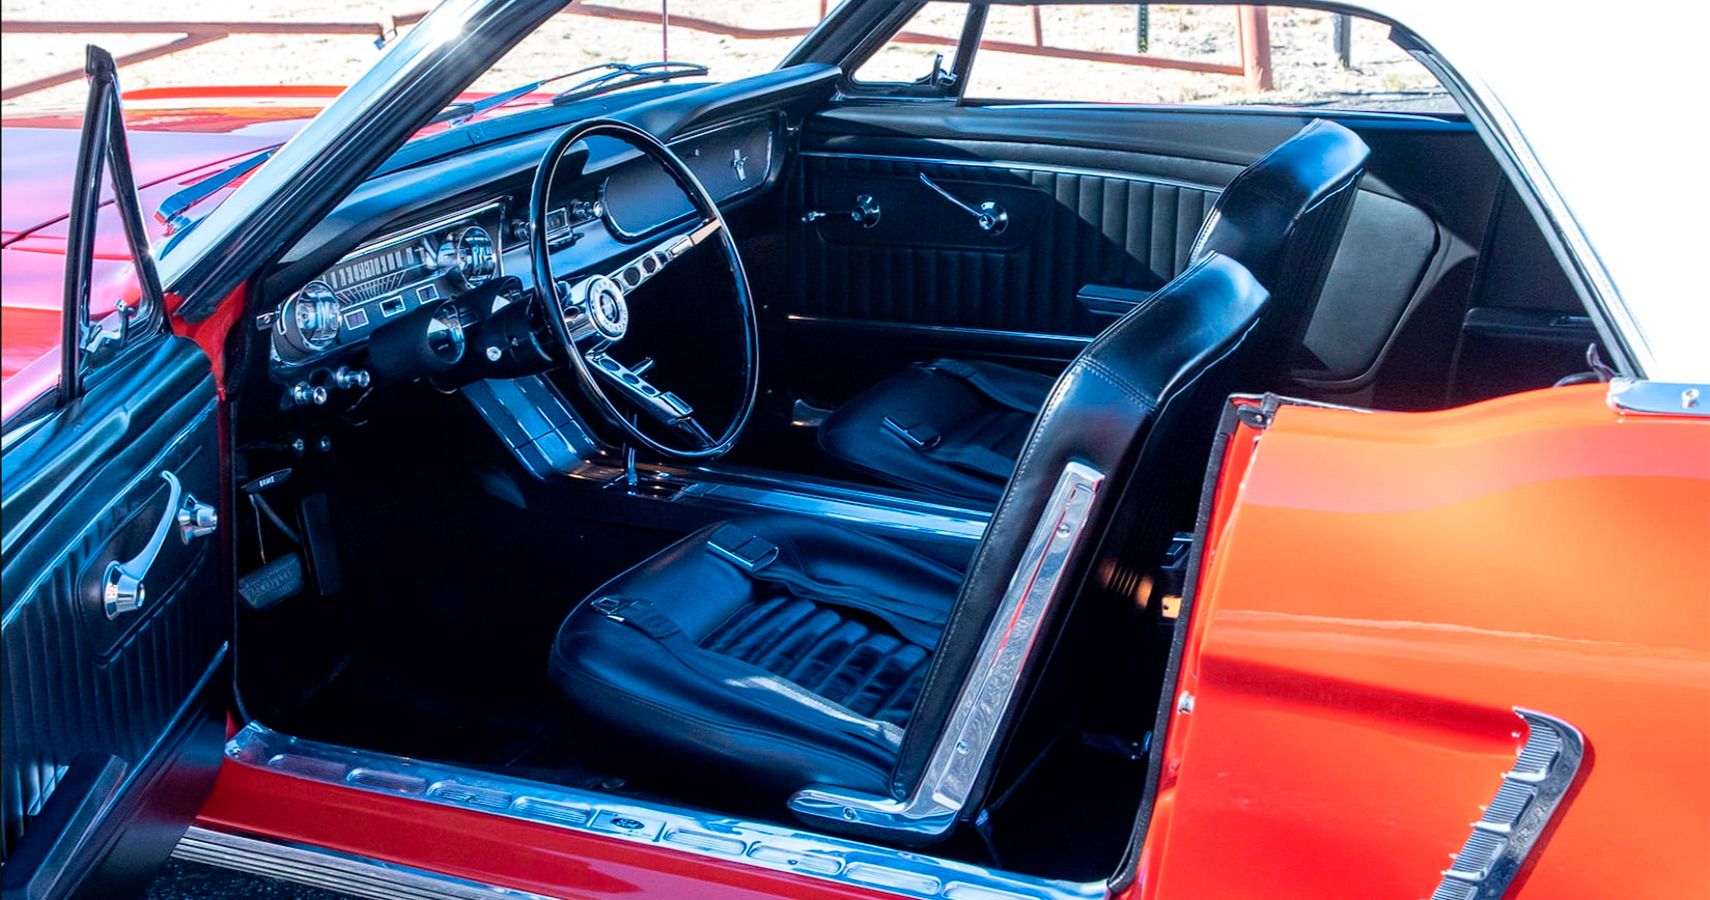 Pre-production Mustang interior